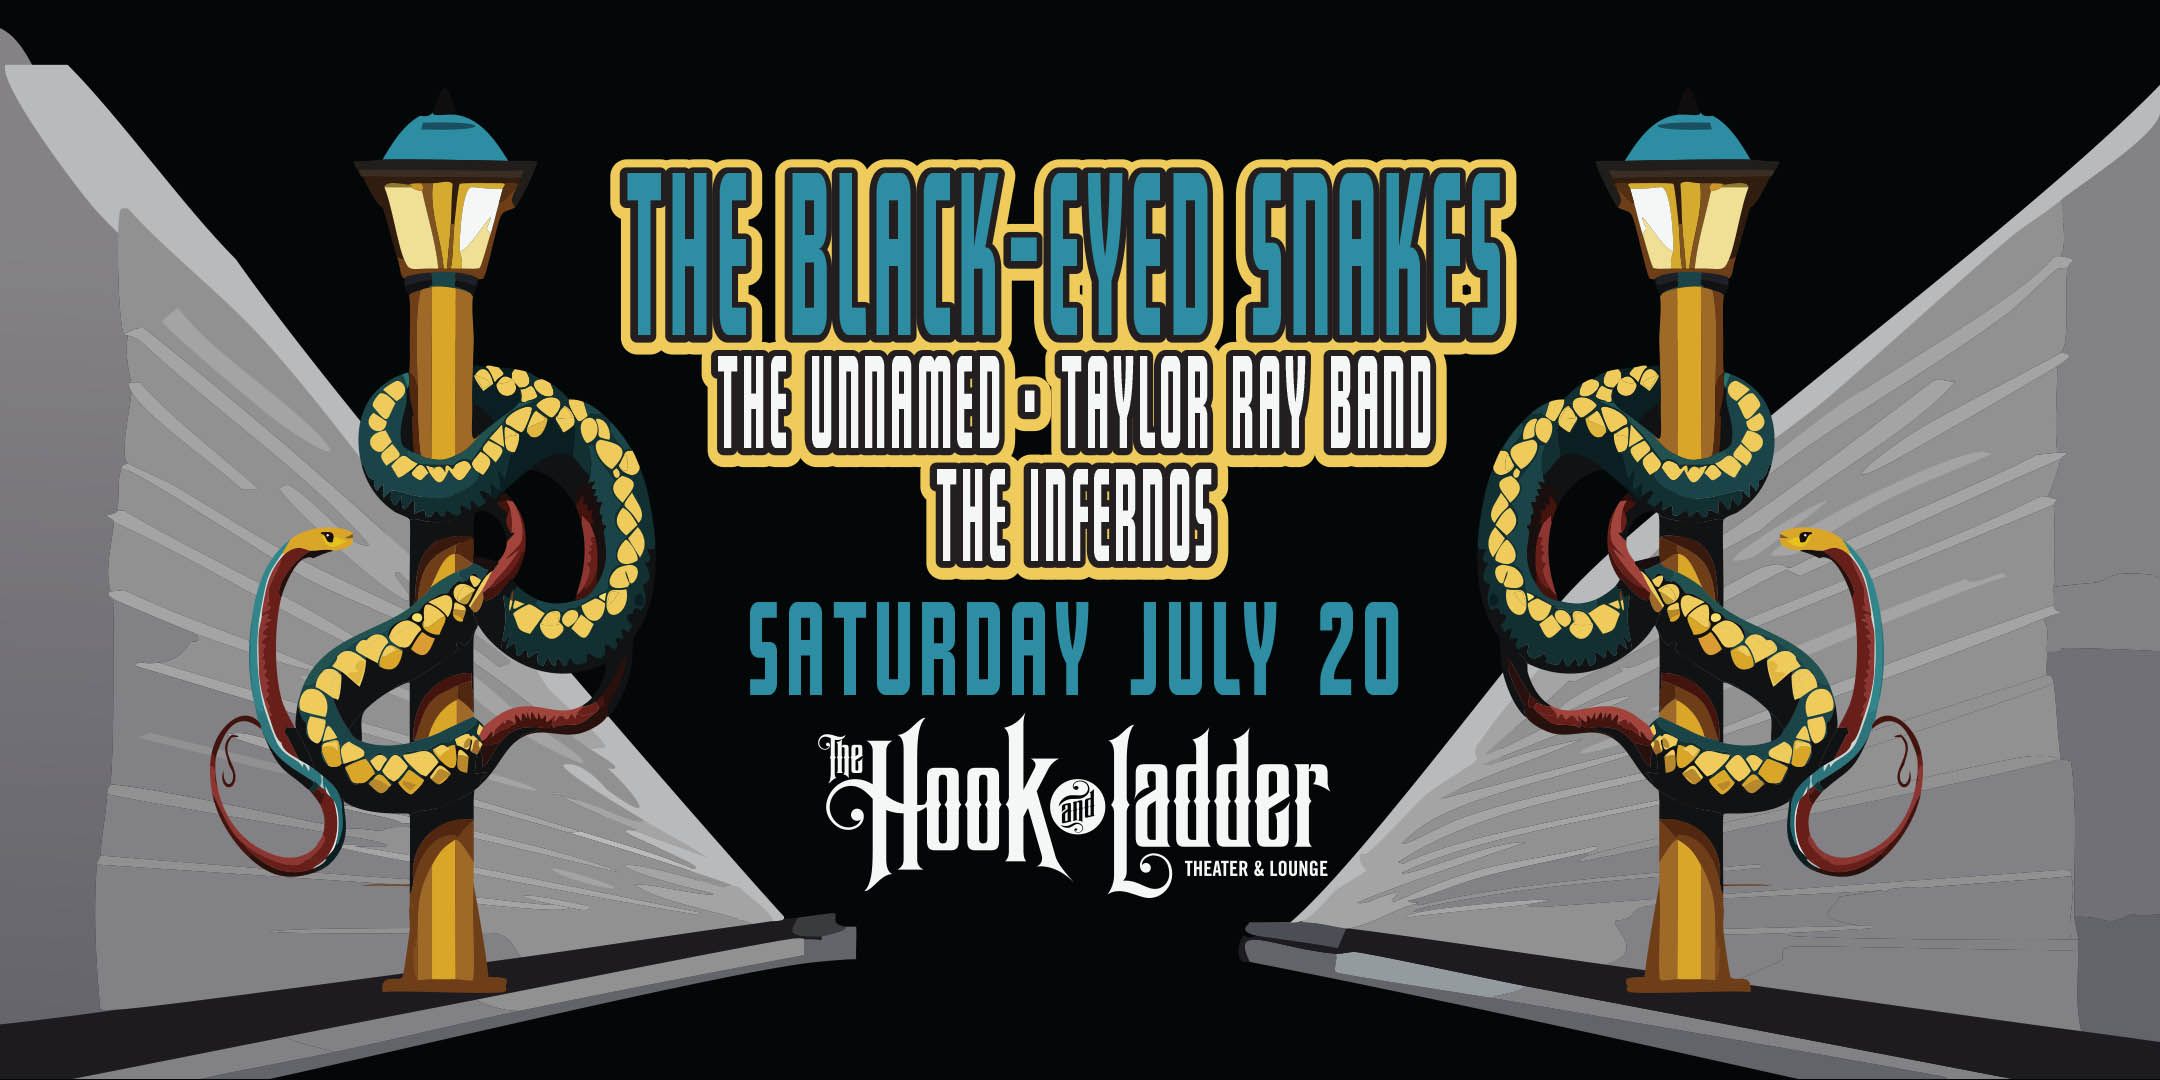 The Black-eyed Snakes with special guests: The Unnamed | Taylor Ray Band | The Infernos Saturday, July 20 The Hook and Ladder Theater Doors 7:30pm :: Music 8:00pm :: 21+ GA $20 ADV / $25 DOS NO REFUNDS